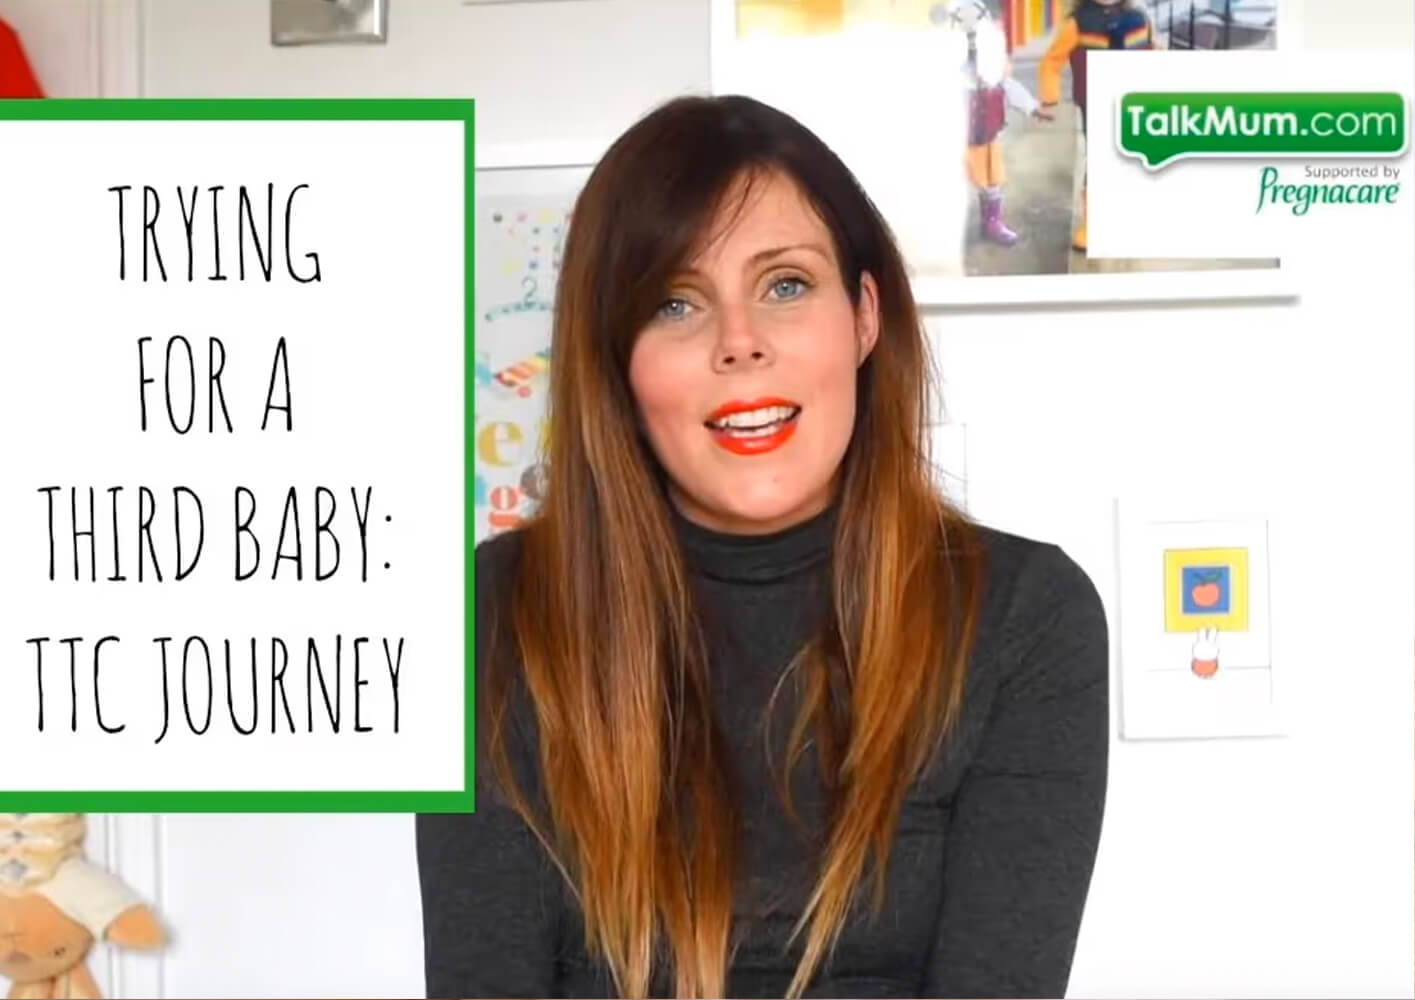 Trying for a third baby: Katie's TTC journey